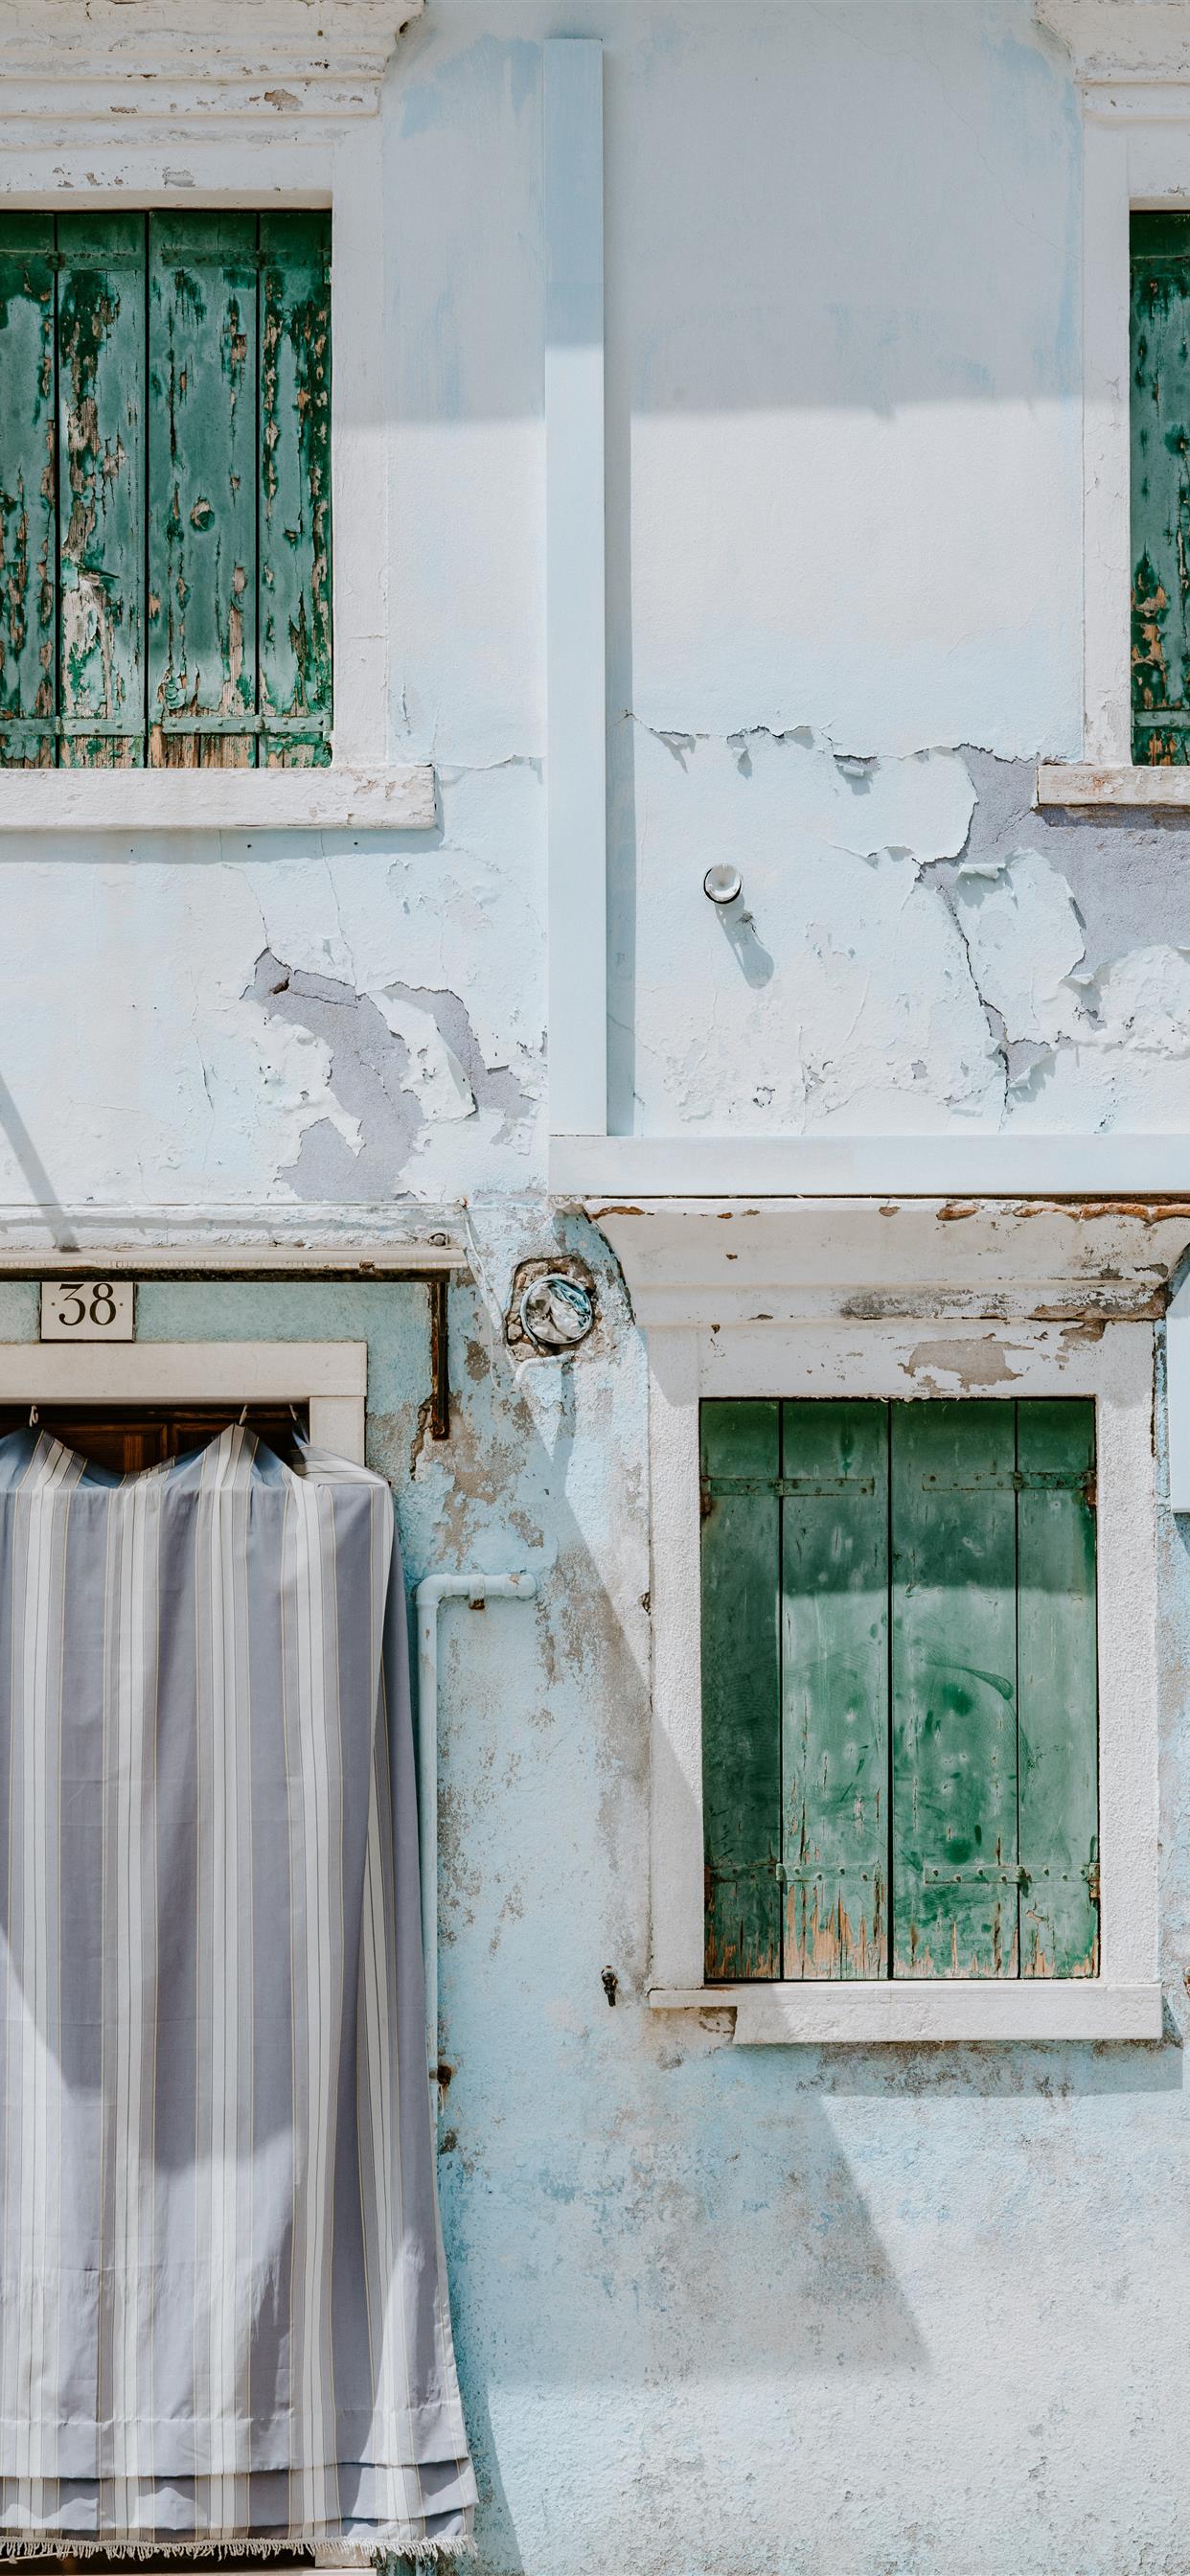 A close up of a building with green shutters and a striped cloth hanging out to dry - Pastel blue